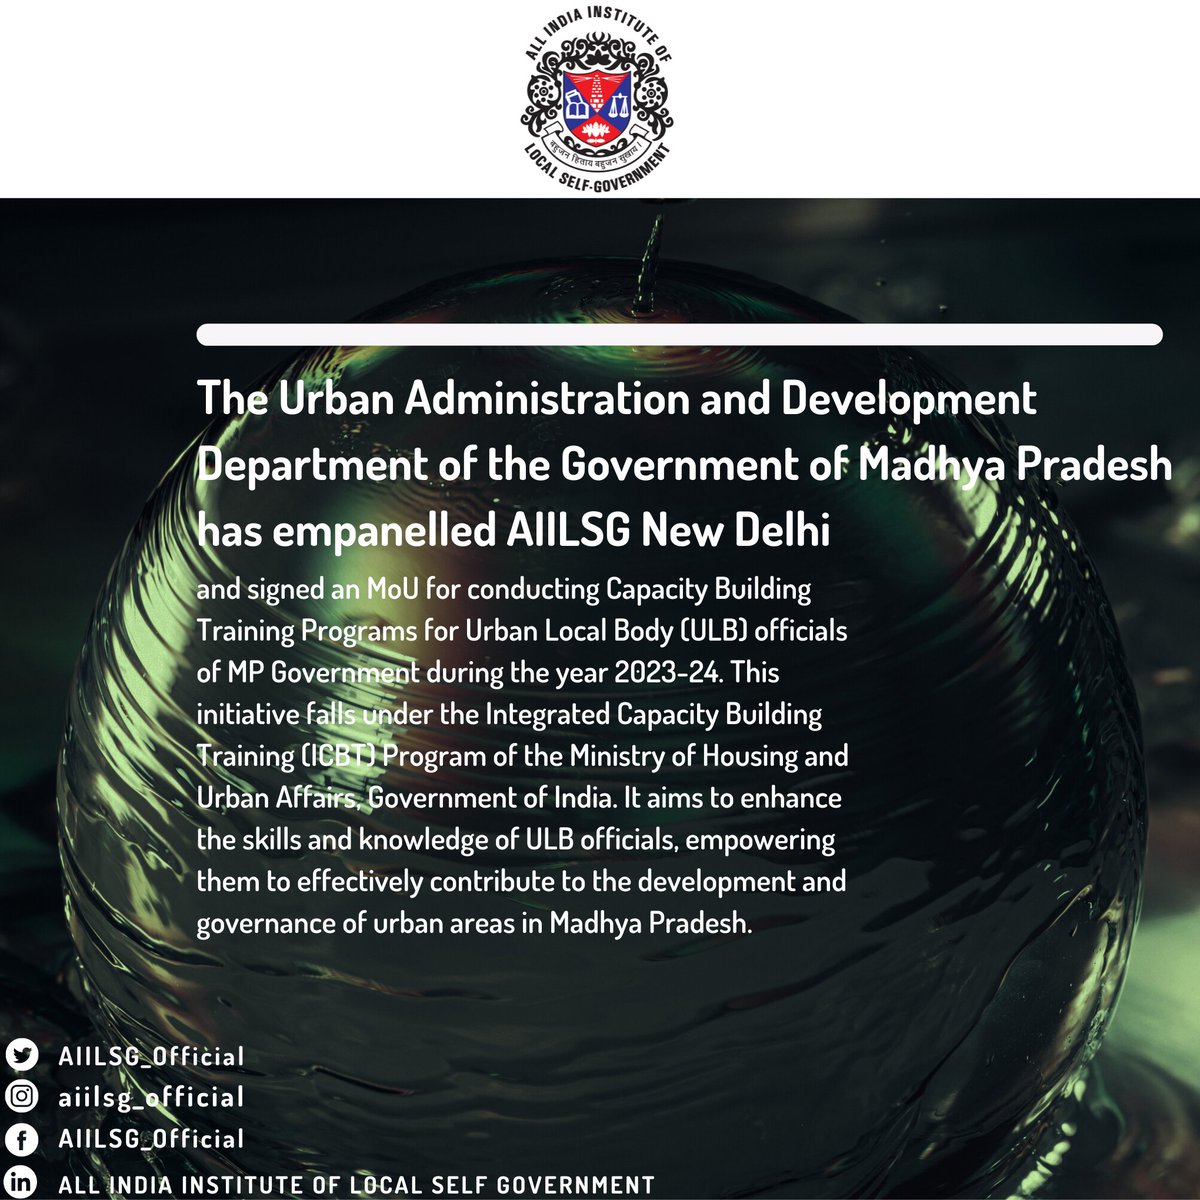 The #UrbanAdministration and #Development Department of the Government of #MadhyaPradesh  has empaneled AIILSG, New Delhi and signed an MoU for conducting Capacity Building Training Programs for #UrbanLocalBodies (ULB's) officials of MP #Government during the year 2023-24.